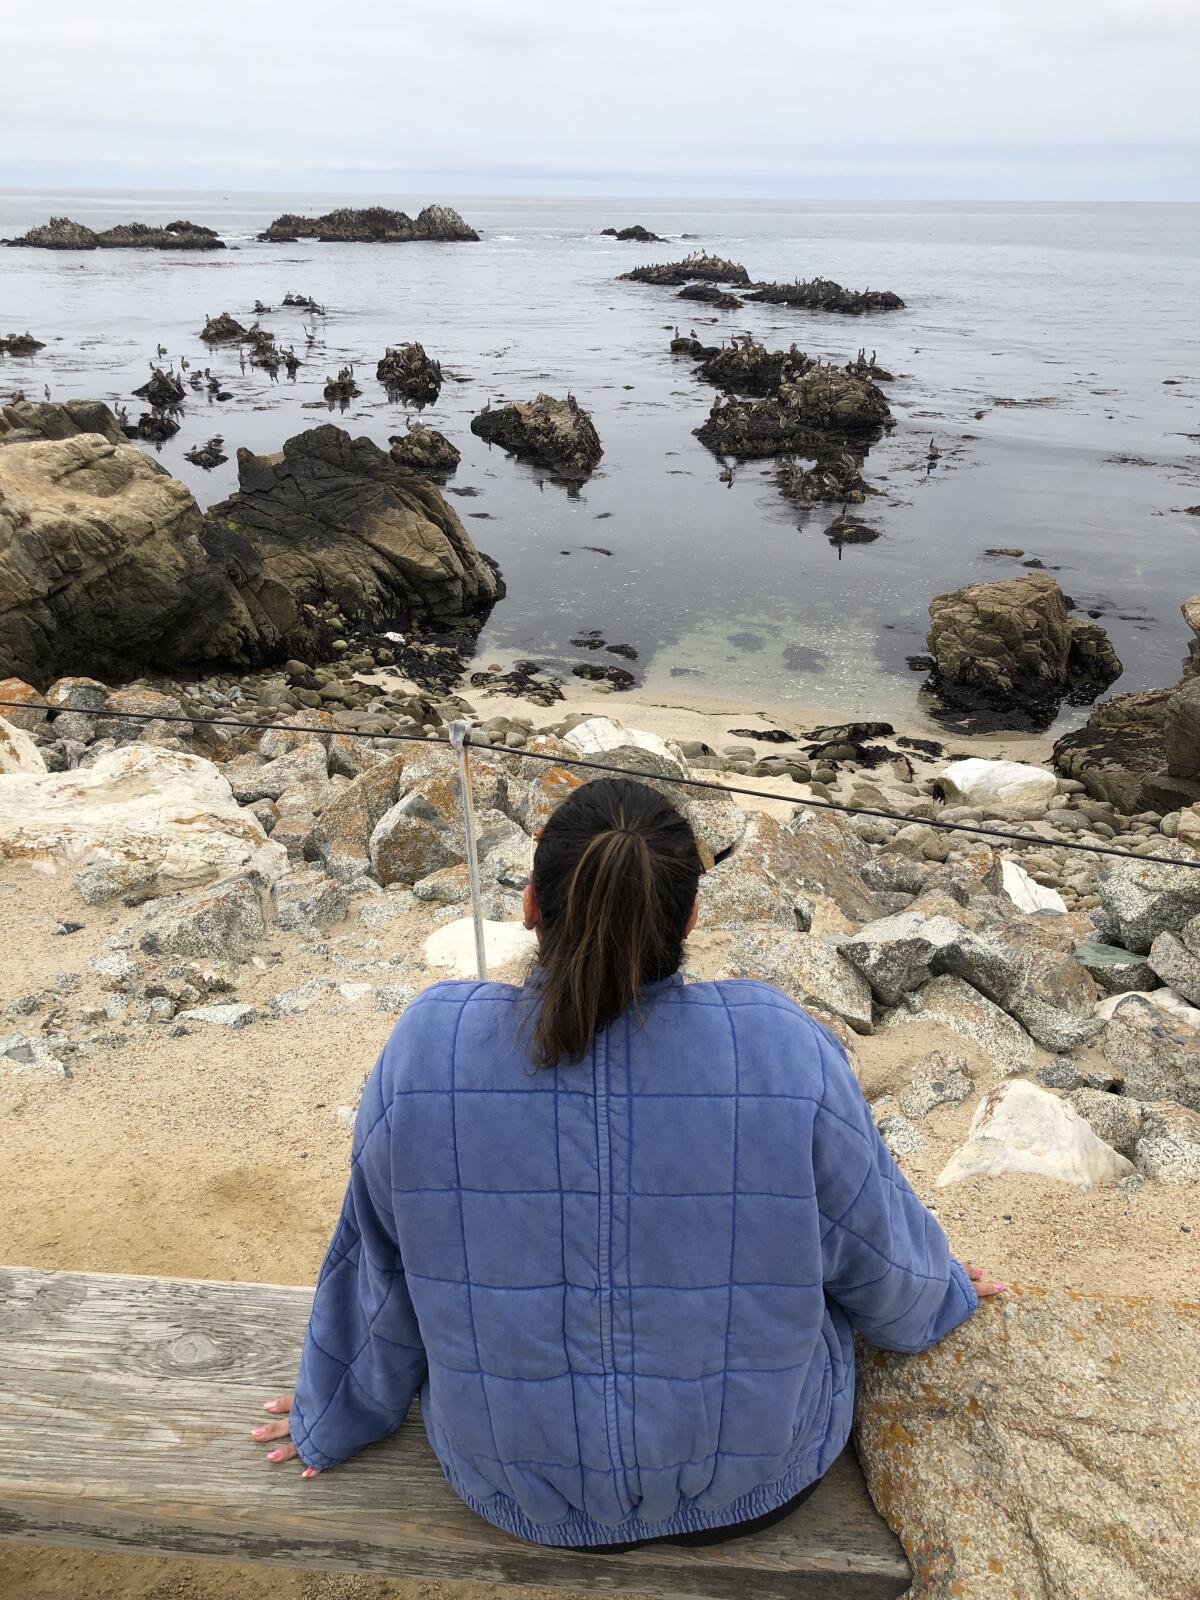 A woman sits with her back to camera, looking out at a rocky coastline with pelicans resting on rocks.